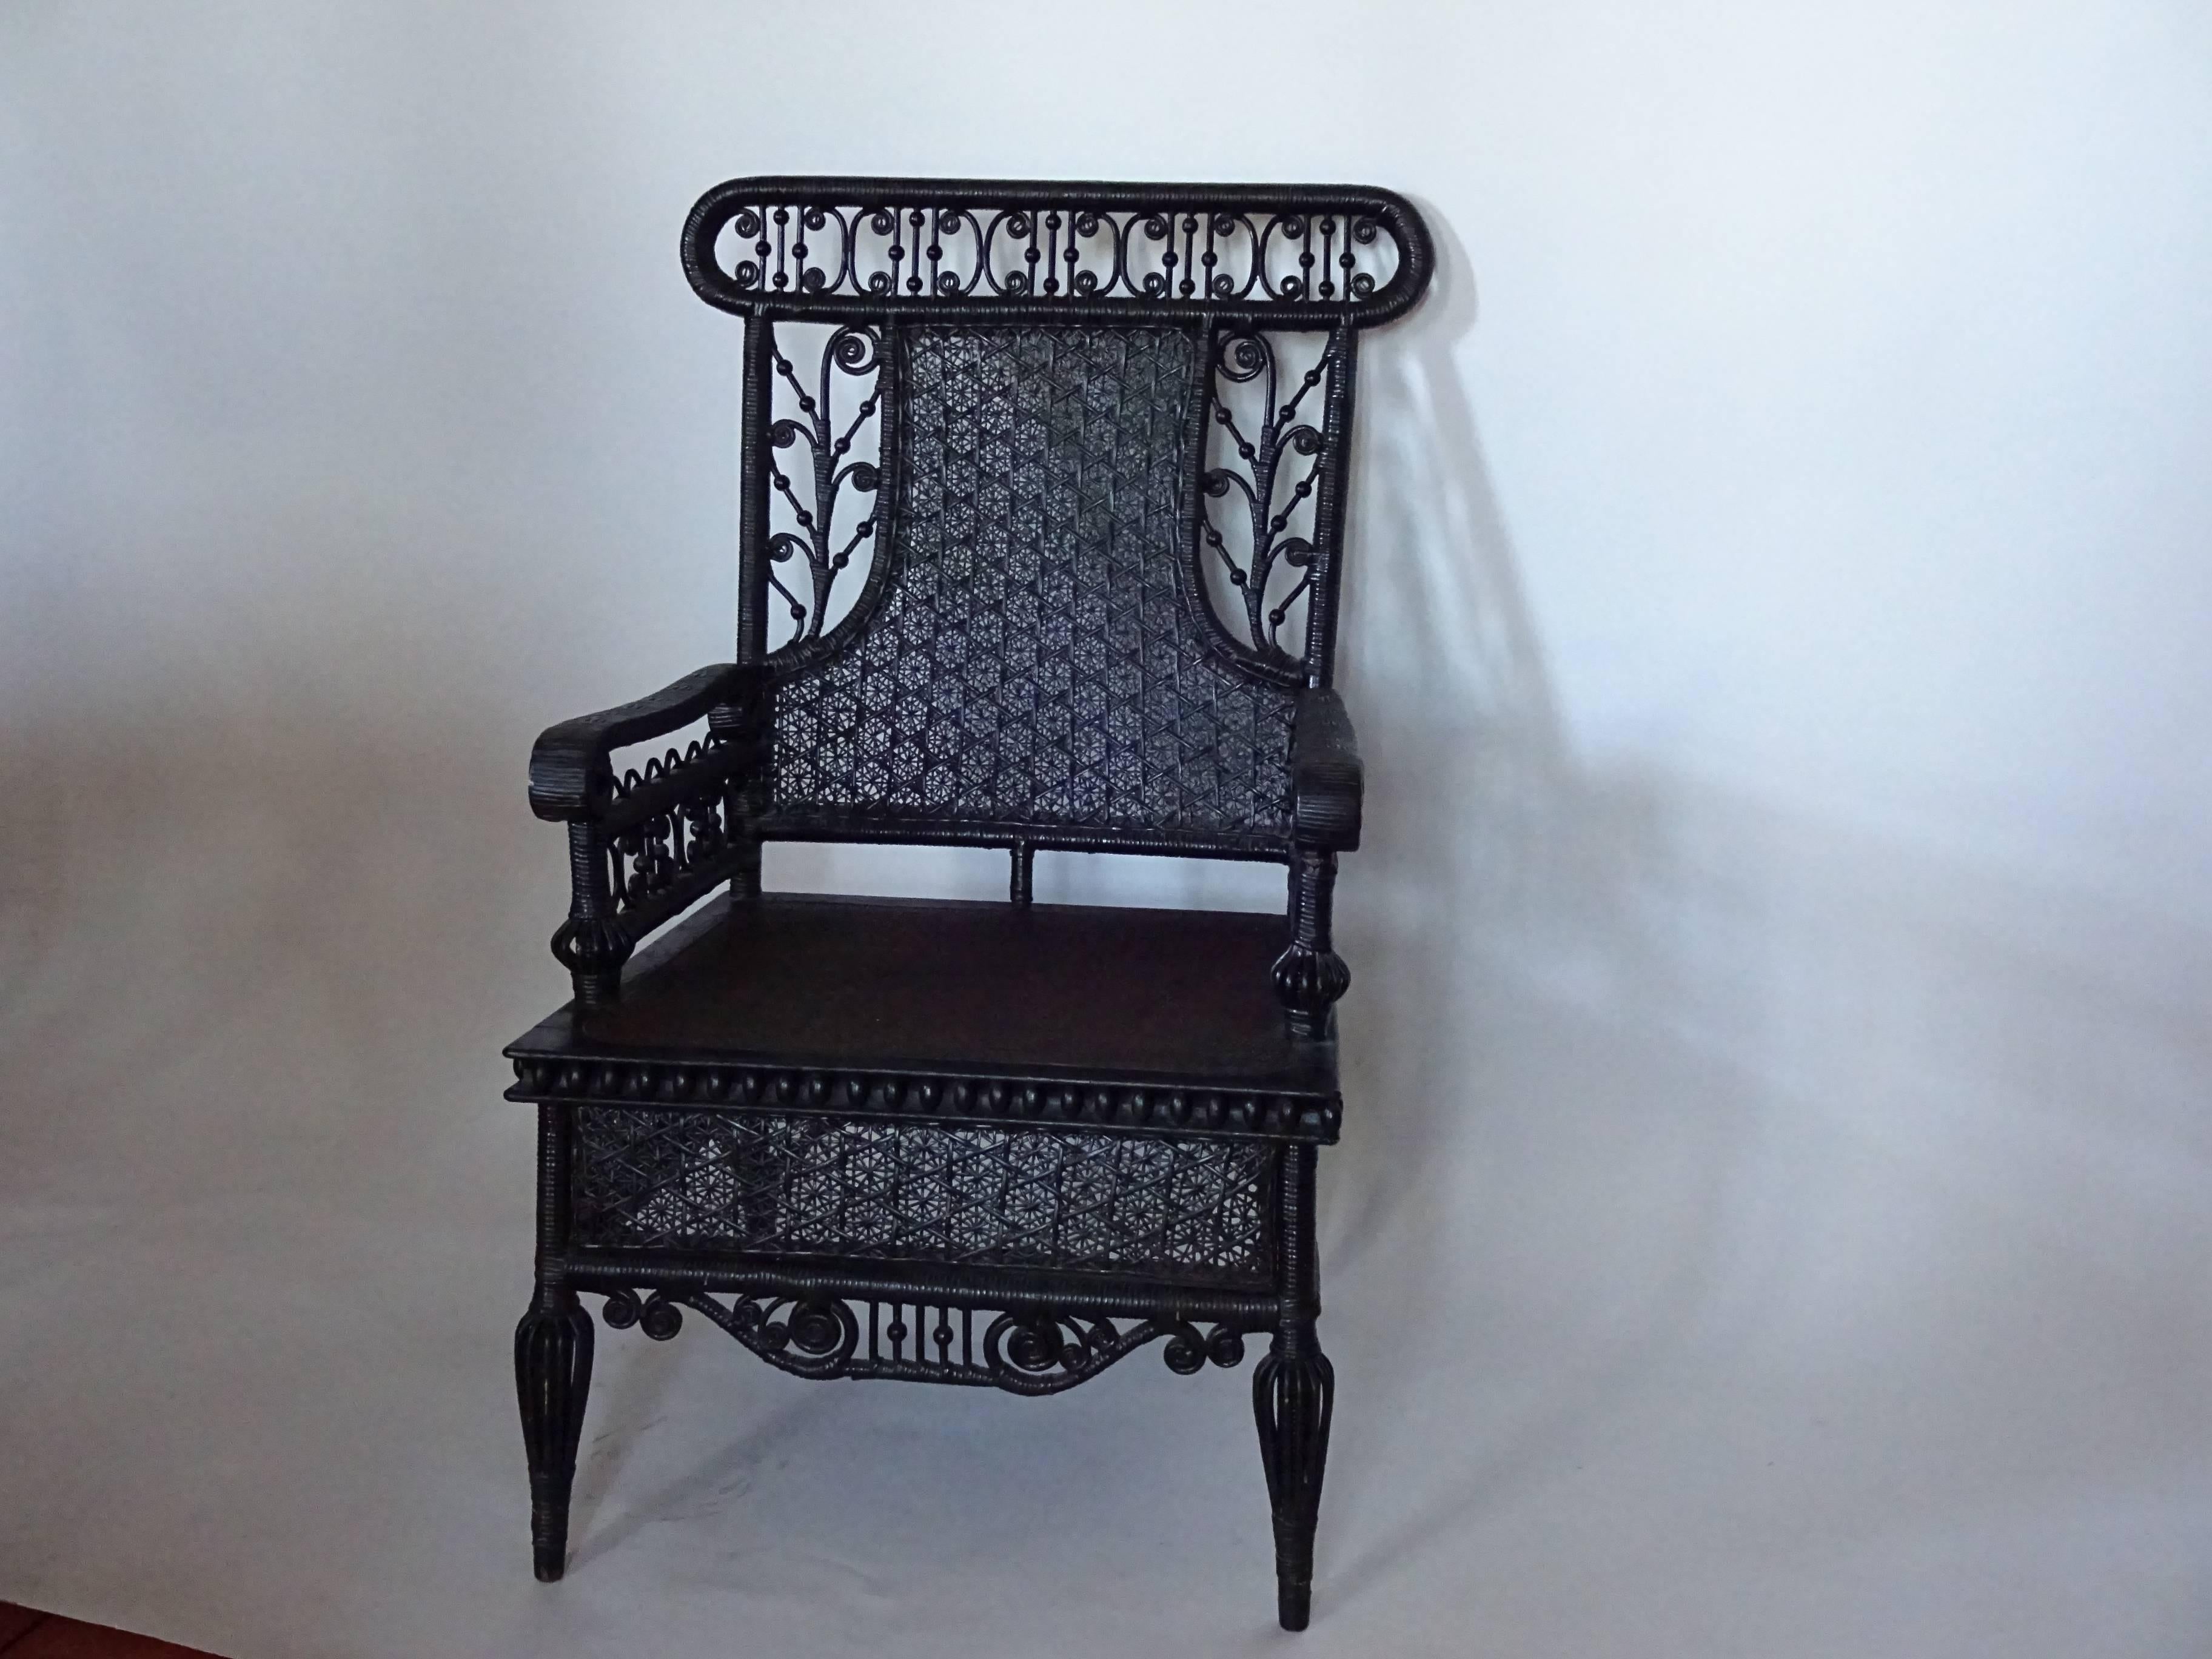 Victorian black painted wicker armchair. Heywood-Wakefield style. Fitted
with a chintz upholstered loose down cushion. Lovely, lacy wicker work. Height
to seat with cushion is 20.